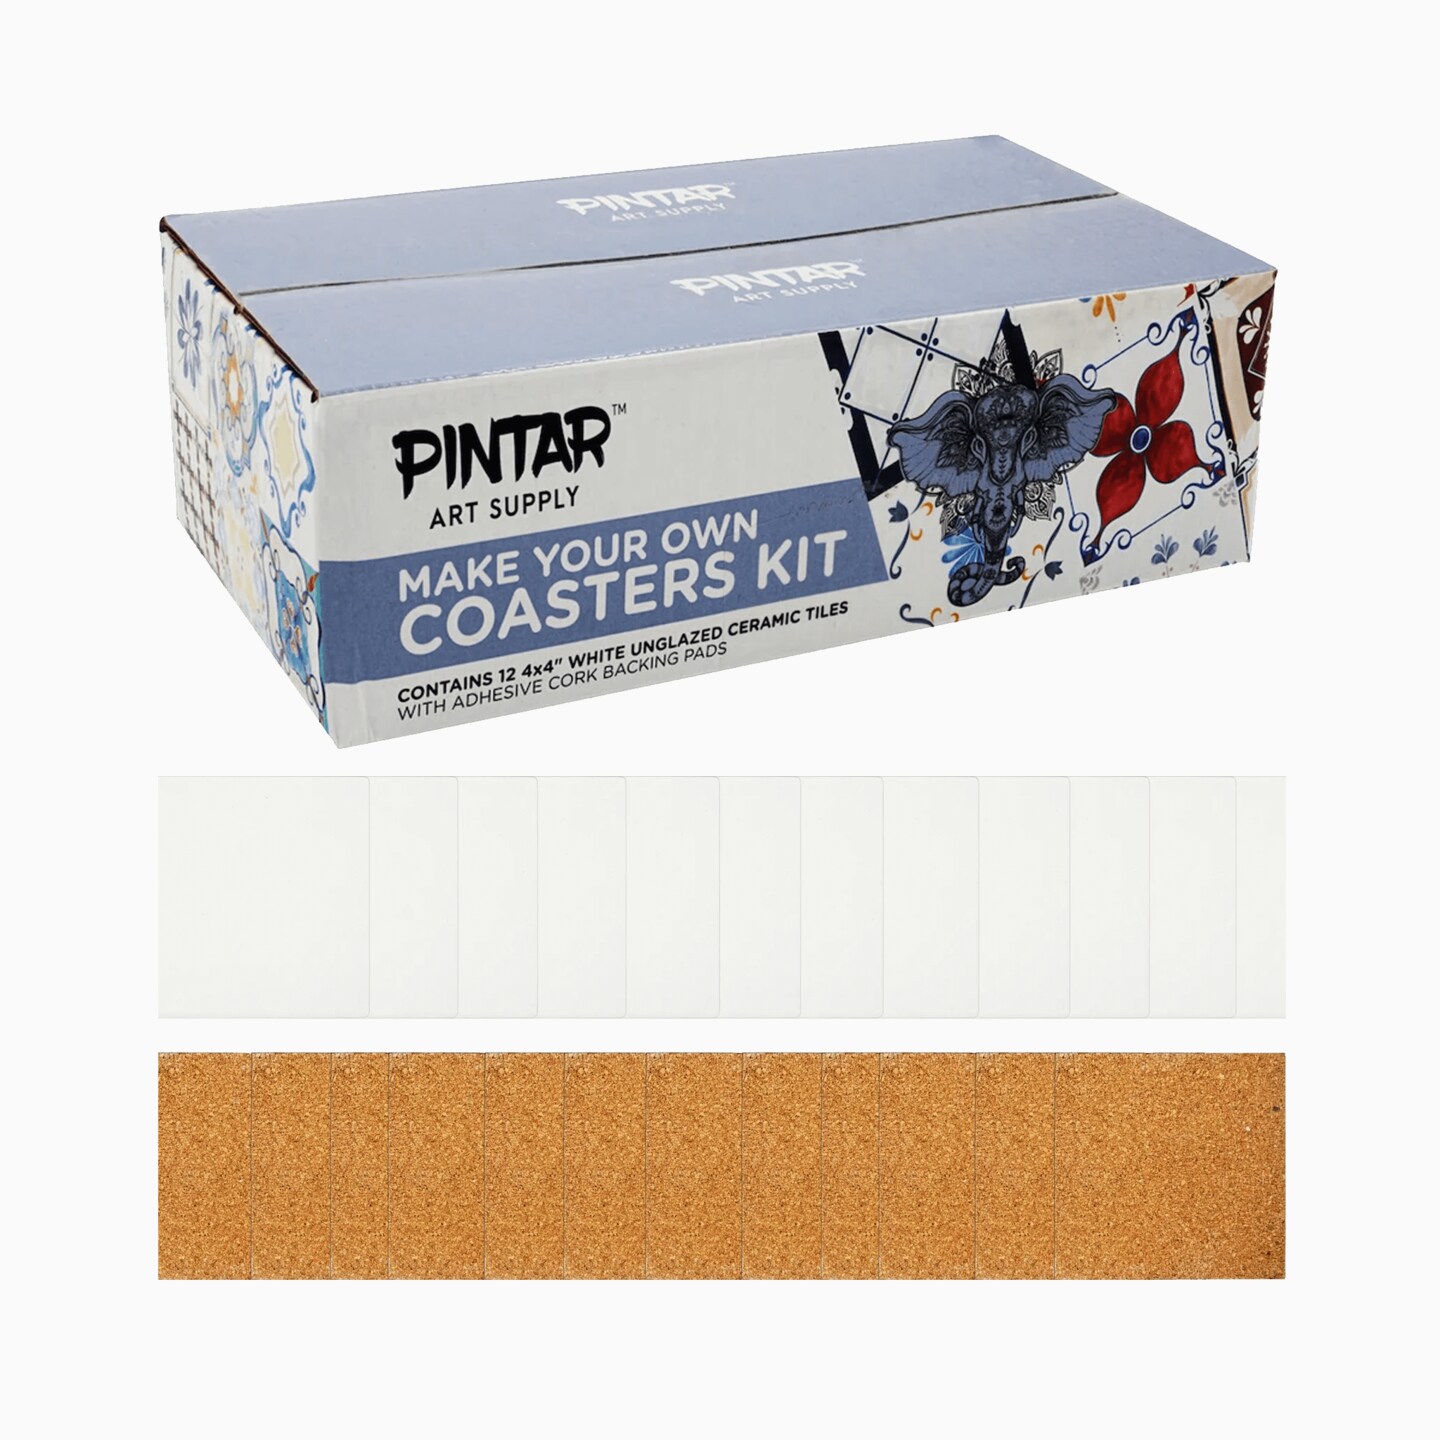 Pintar Make Your Own Coasters Kit | 12 Pack of 4x4&#x201D; White Unglazed Ceramic Tiles with Adhesive Cork Backing Pads, Use with Alcohol Ink, Acrylic Paints